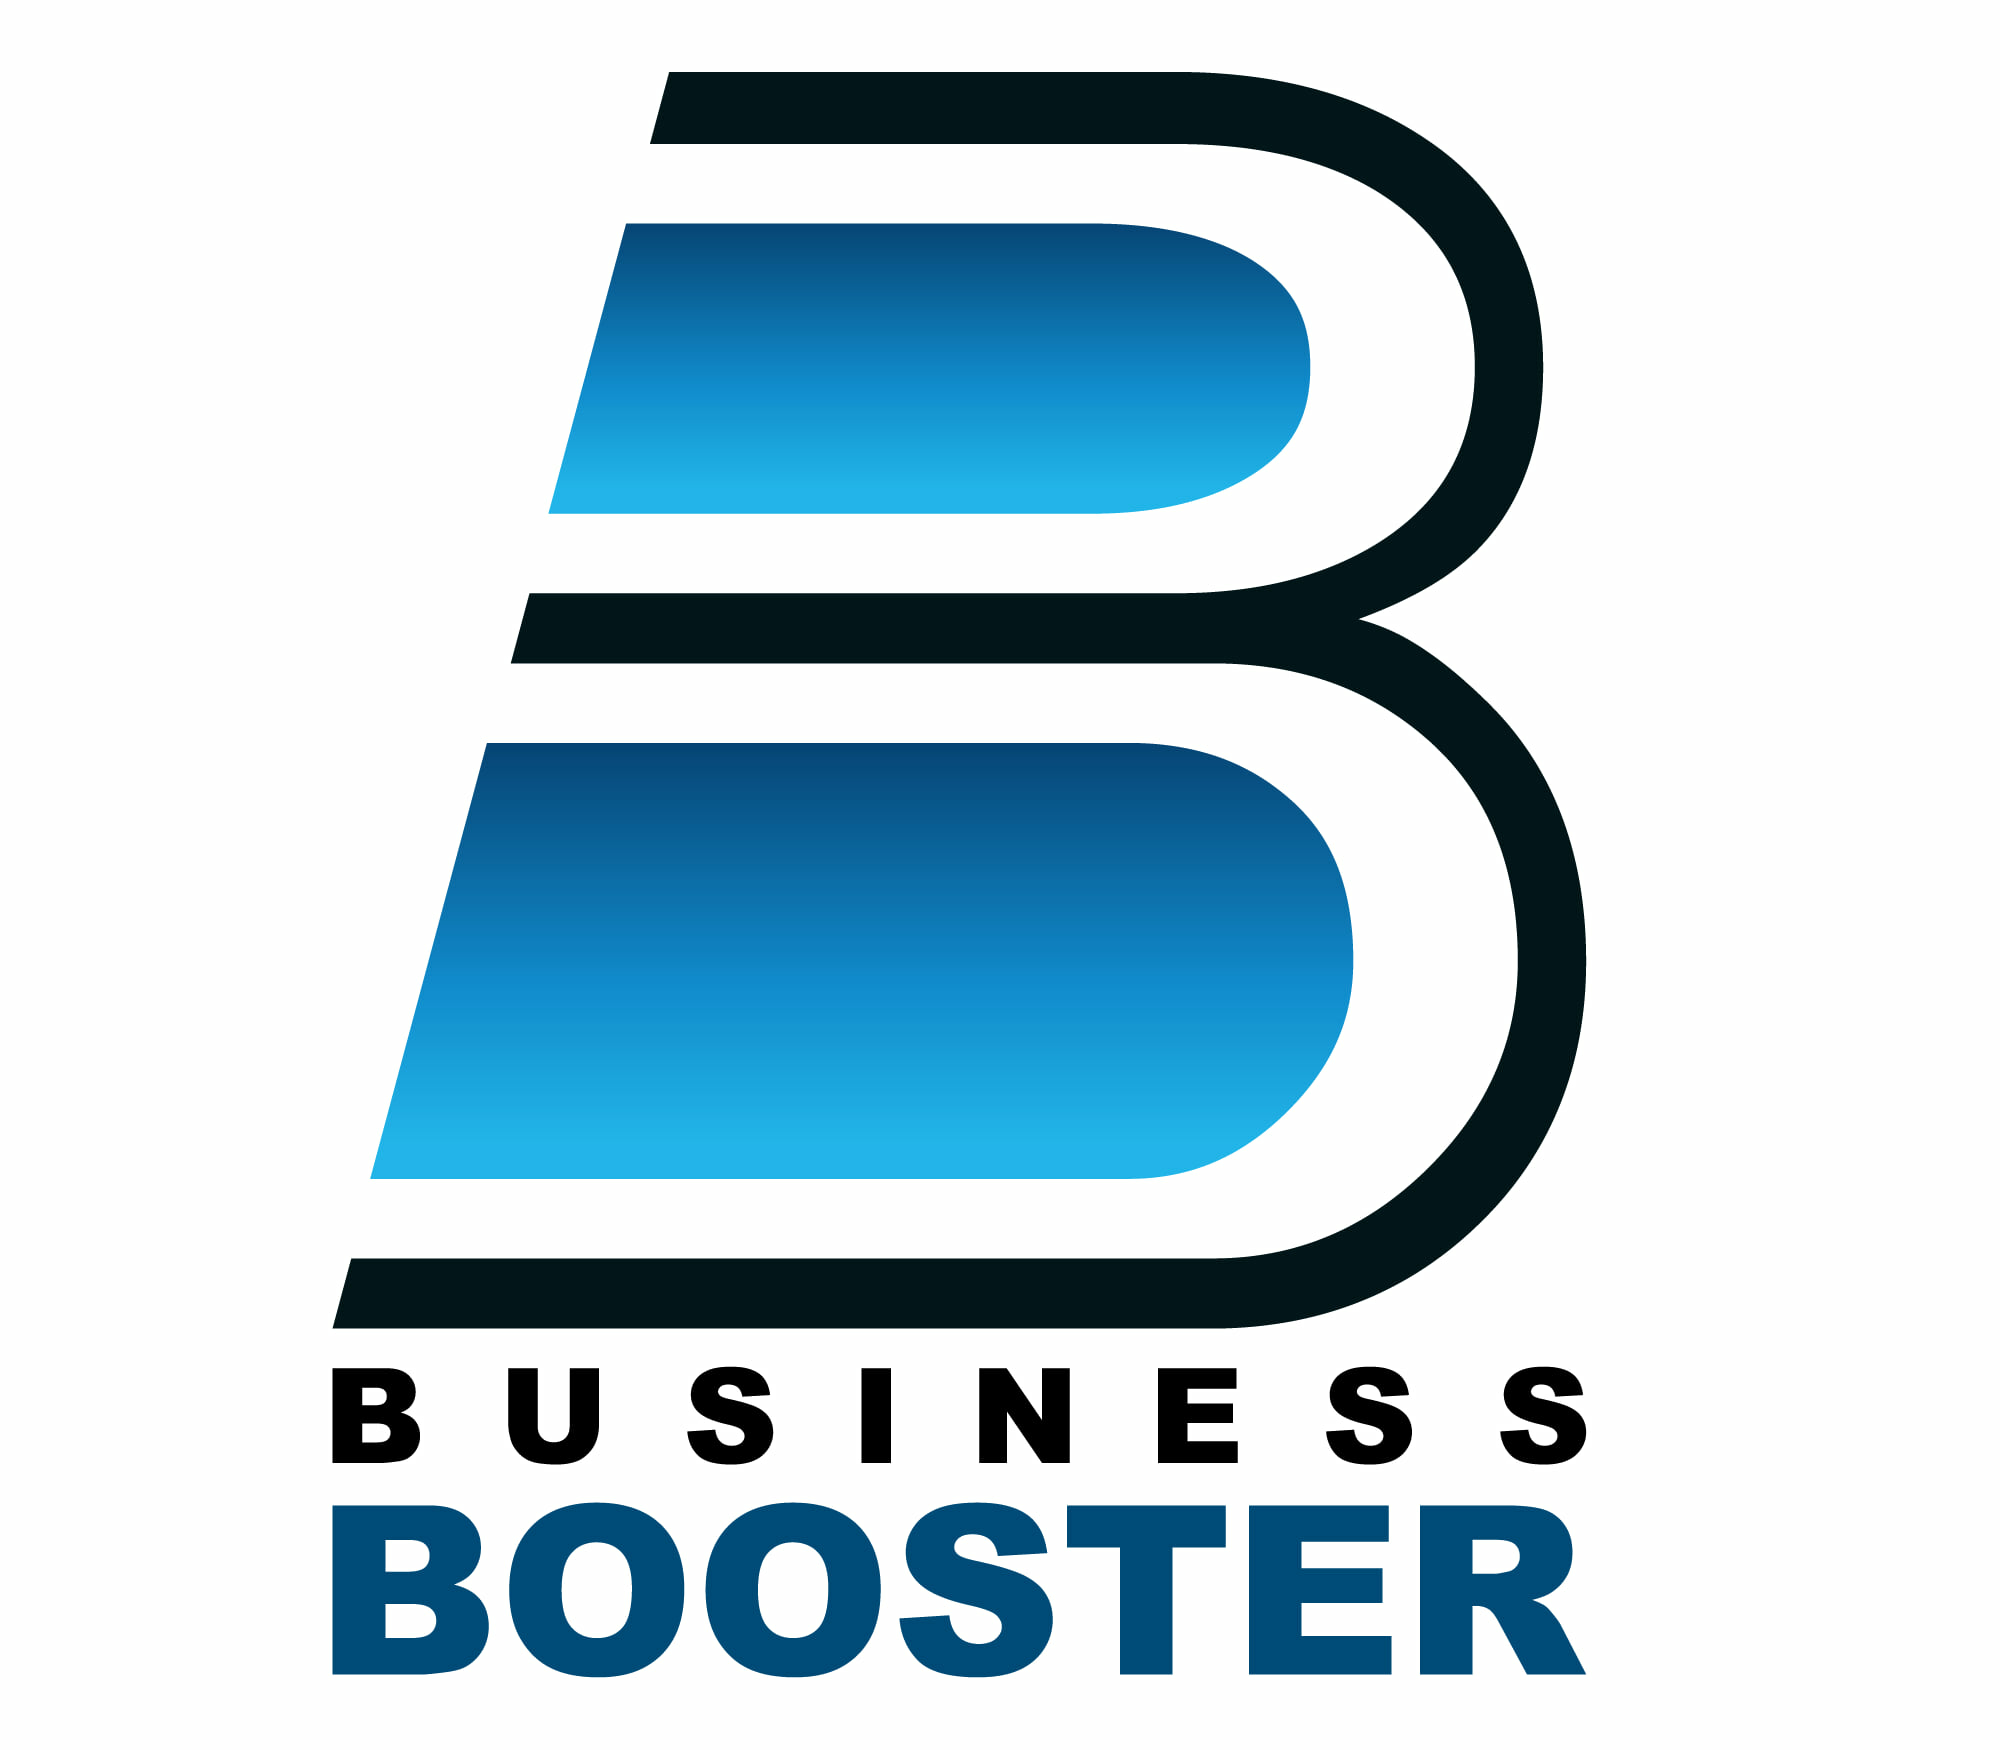 BUSINESS BOOSTER